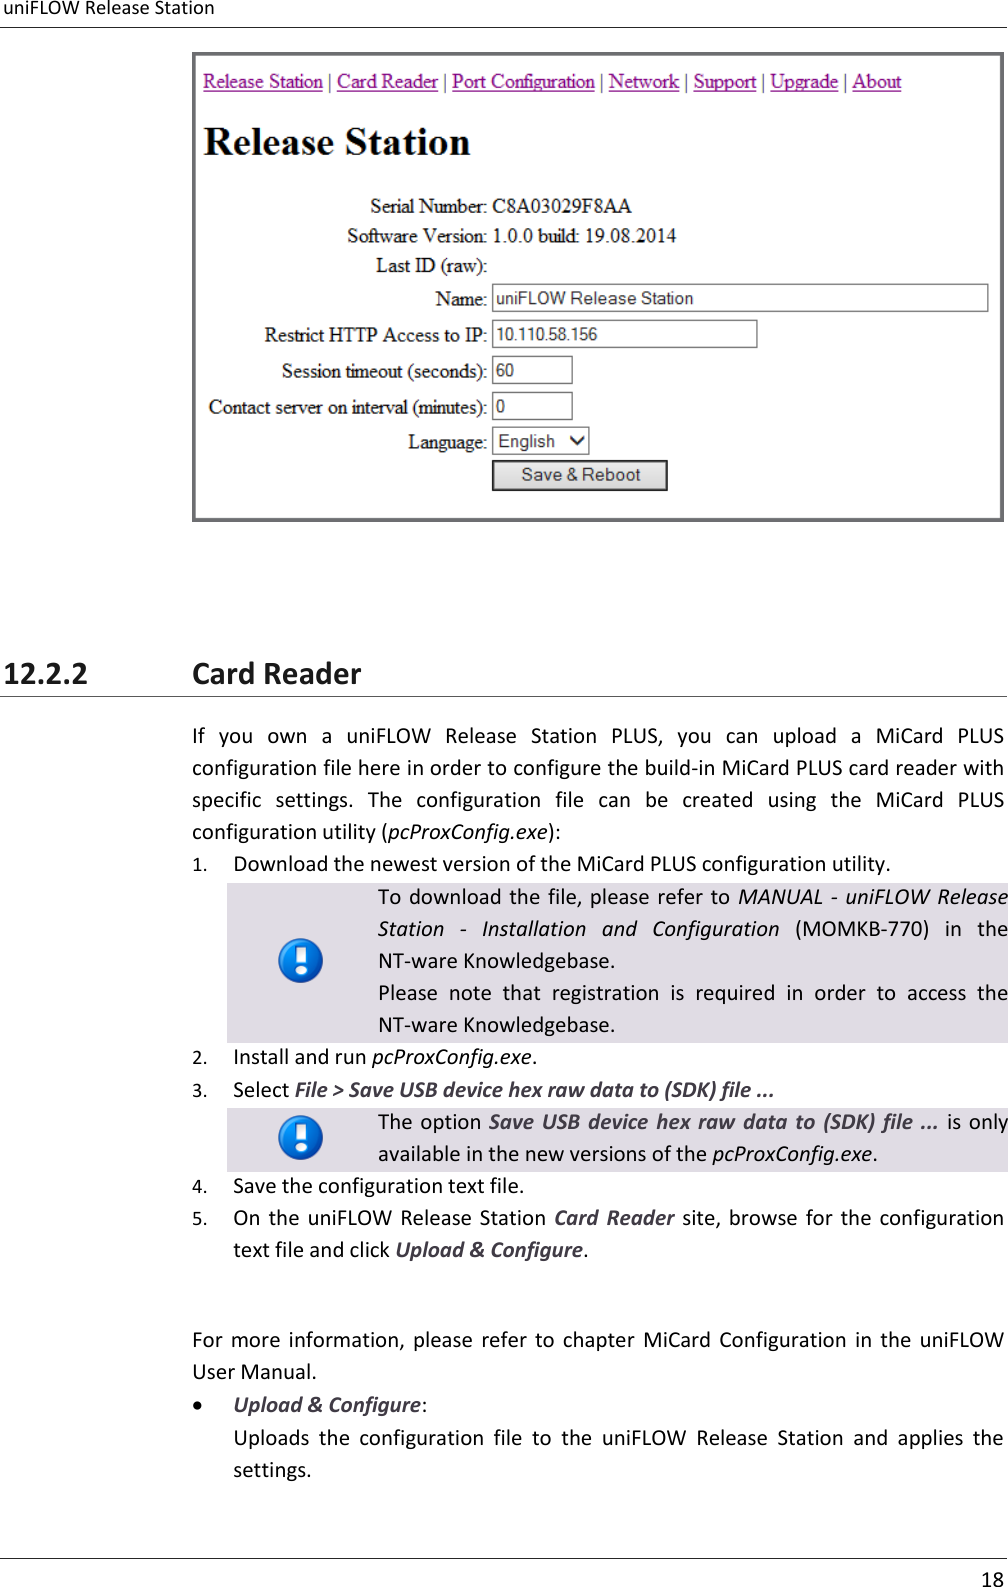 uniFLOW Release Station     18     12.2.2 Card Reader If  you  own  a  uniFLOW  Release  Station  PLUS,  you  can  upload  a  MiCard  PLUS configuration file here in order to configure the build-in MiCard PLUS card reader with specific  settings.  The  configuration  file  can  be  created  using  the  MiCard  PLUS configuration utility (pcProxConfig.exe): 1. Download the newest version of the MiCard PLUS configuration utility.  To download the file, please refer to MANUAL - uniFLOW Release Station  -  Installation  and  Configuration  (MOMKB-770)  in  the NT-ware Knowledgebase. Please  note  that  registration  is  required  in  order  to  access  the NT-ware Knowledgebase. 2. Install and run pcProxConfig.exe. 3. Select File &gt; Save USB device hex raw data to (SDK) file ...  The option Save  USB  device  hex raw  data to  (SDK) file  ... is only available in the new versions of the pcProxConfig.exe. 4. Save the configuration text file. 5. On  the uniFLOW  Release Station  Card  Reader  site, browse  for the  configuration text file and click Upload &amp; Configure.  For  more  information,  please  refer  to  chapter  MiCard  Configuration  in  the  uniFLOW User Manual.  Upload &amp; Configure: Uploads  the  configuration  file  to  the  uniFLOW  Release  Station  and  applies  the settings.  